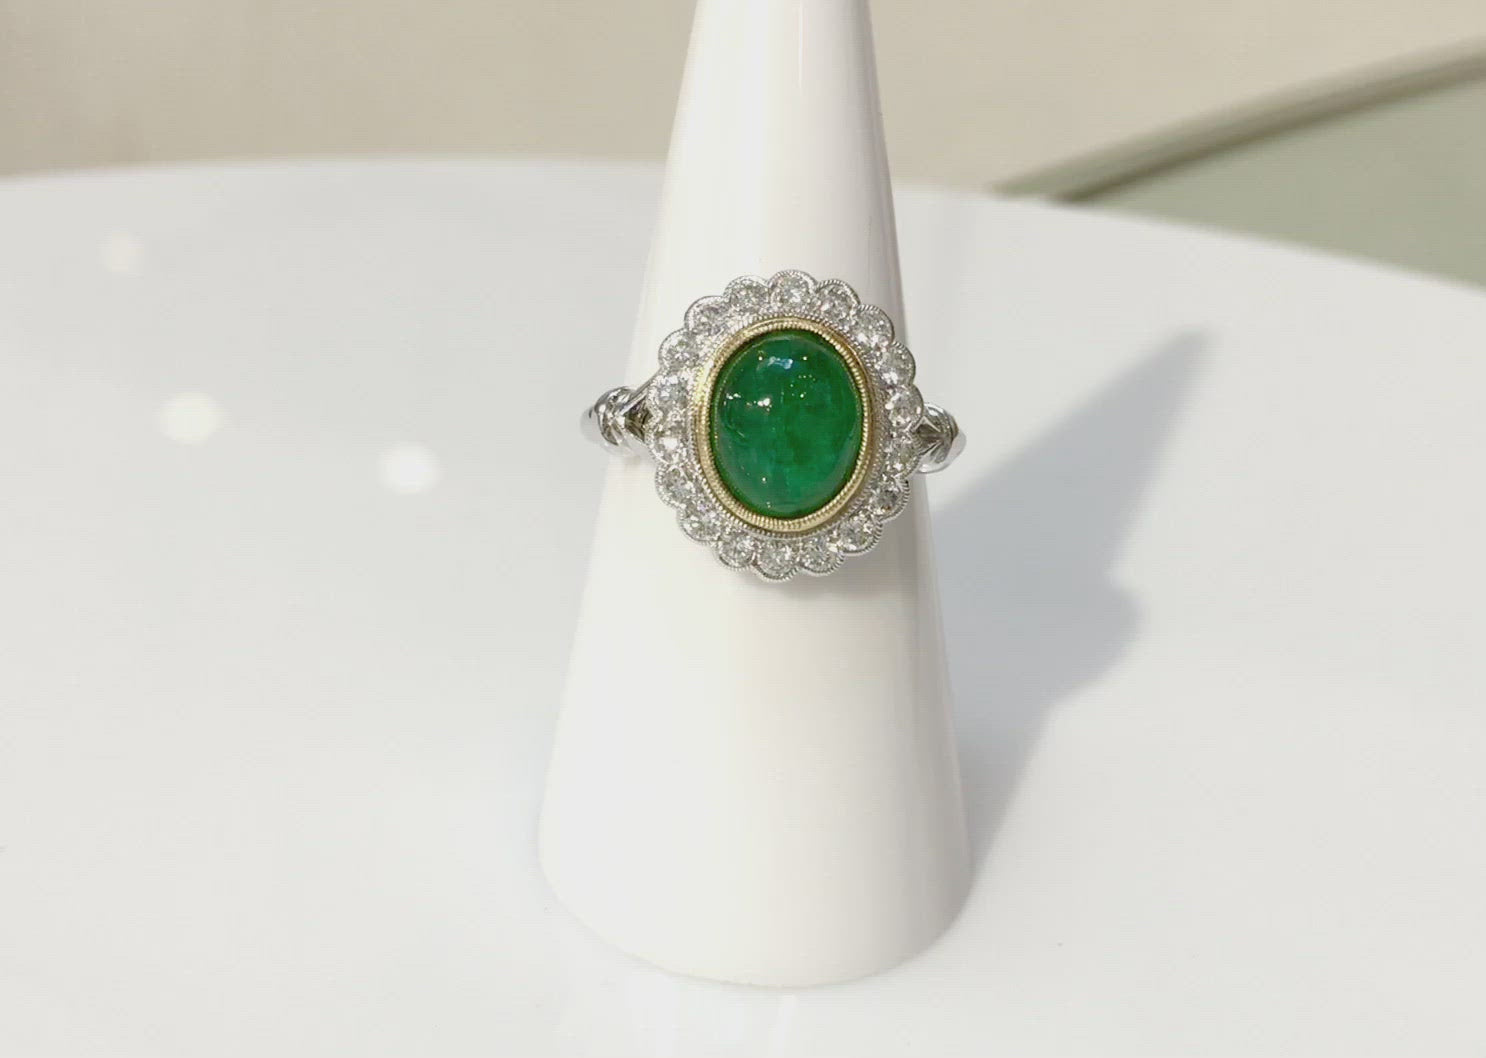 This princess Diana style ring resembles one made during the Edwardian period of the early 1900s.